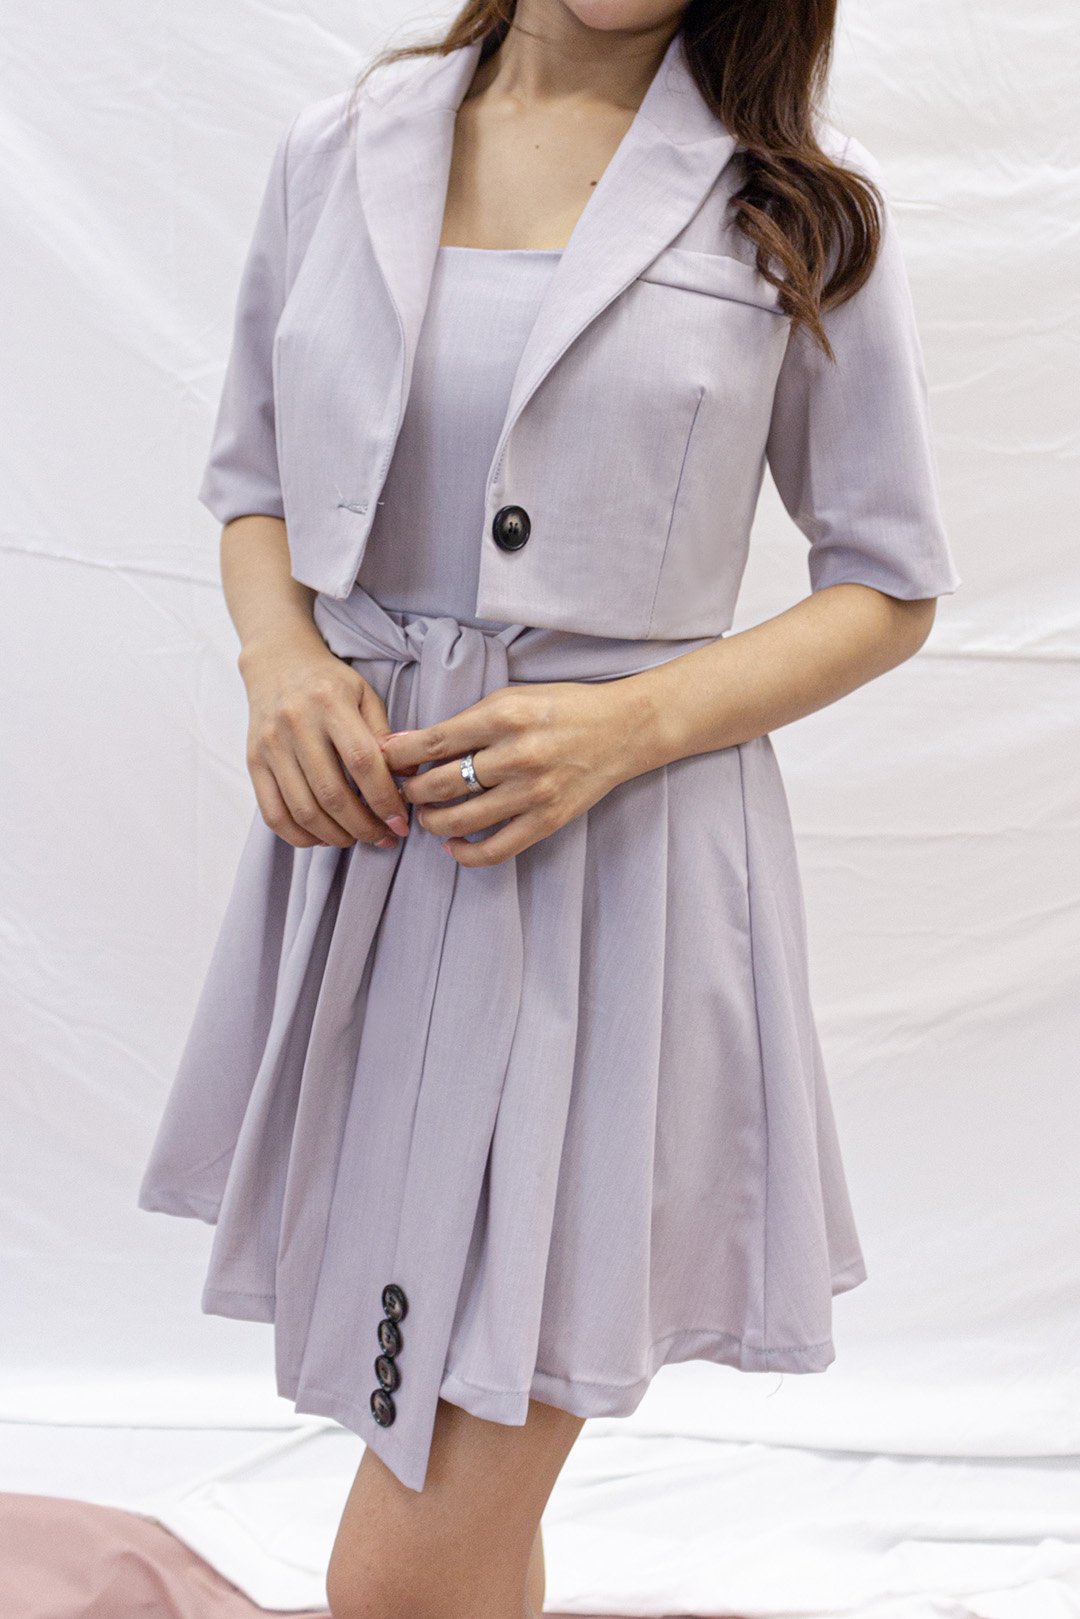 Pleated dress with cropped outwear, perfect for work